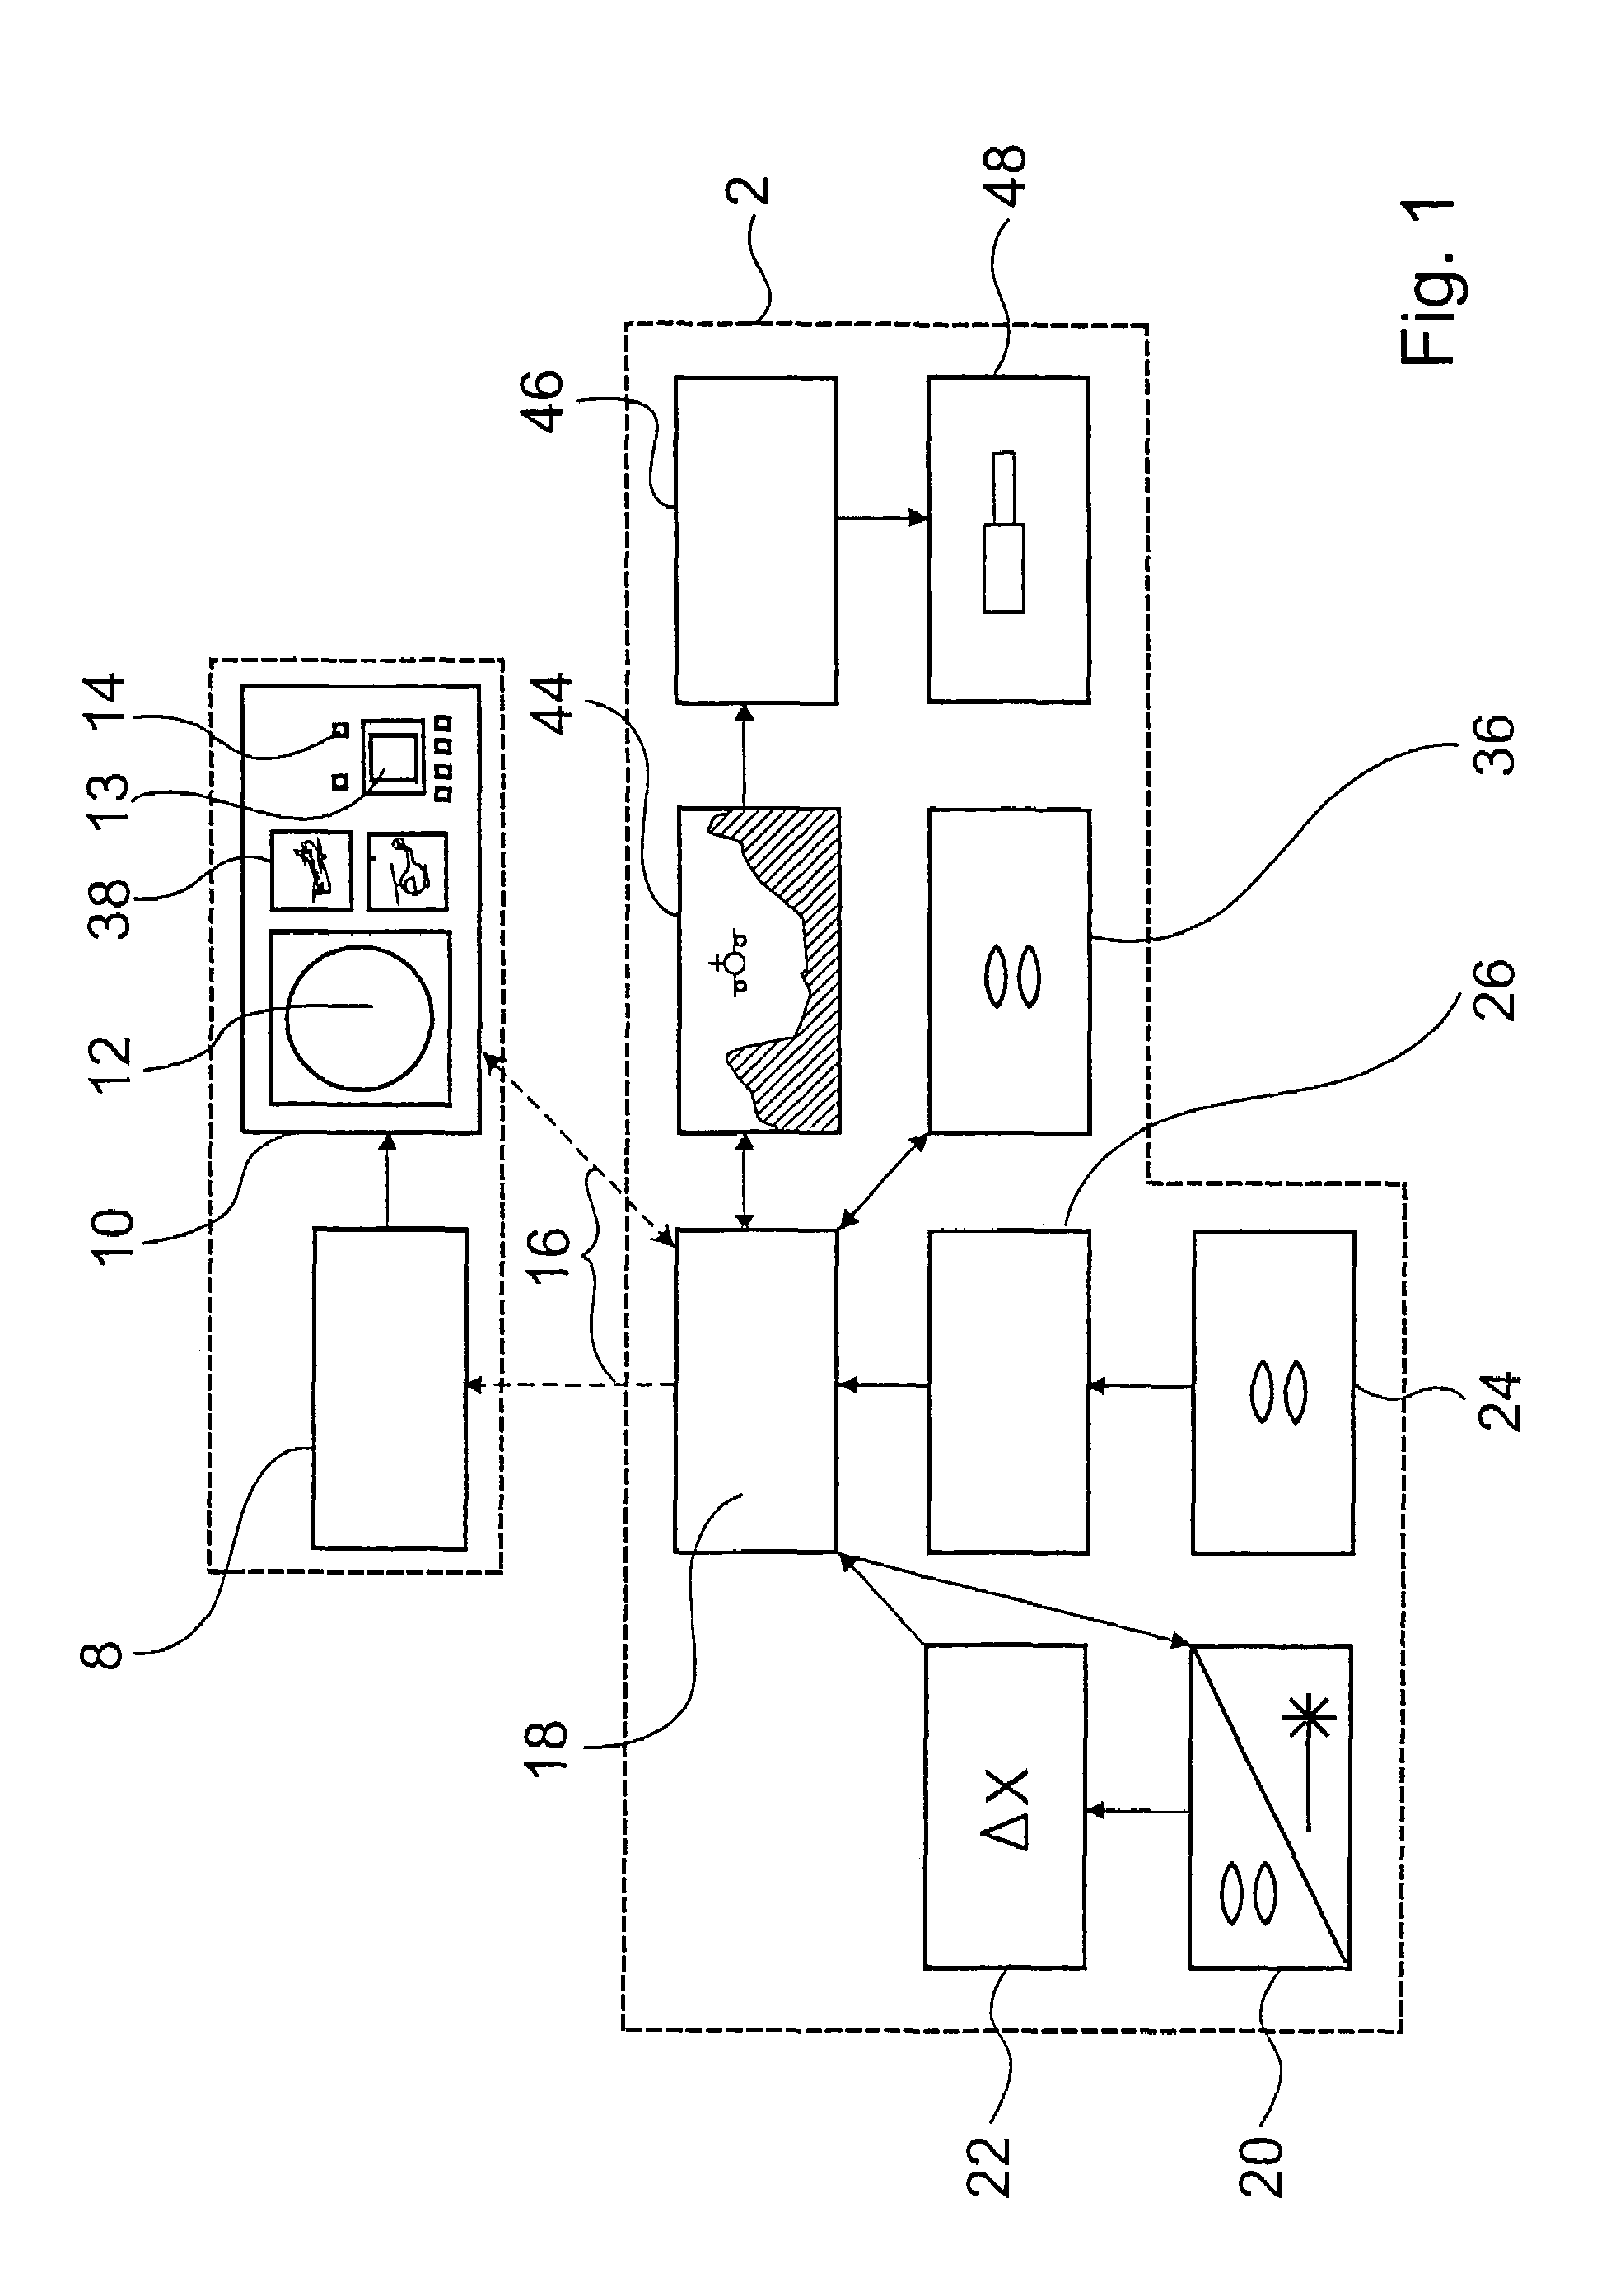 Method and apparatus for detecting a flight obstacle